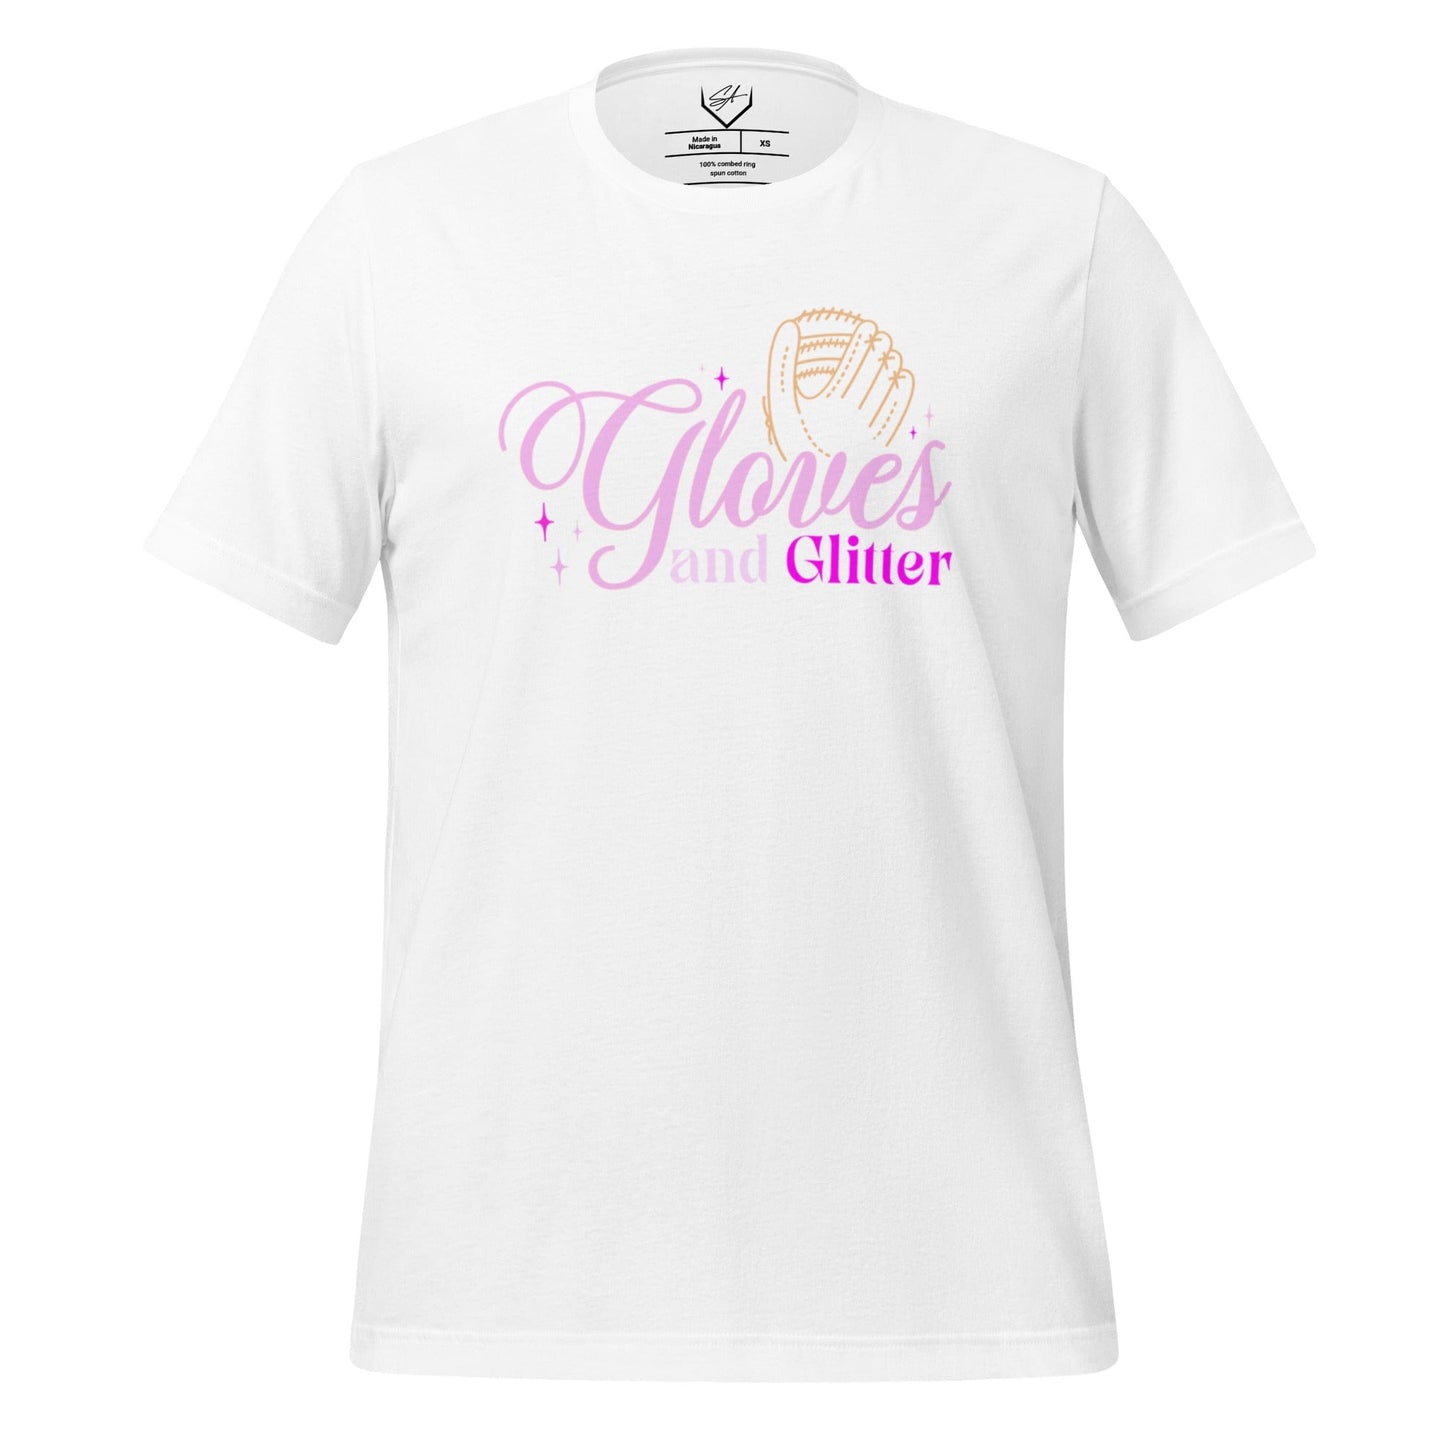 Gloves And Glitter Pink - Adult Tee